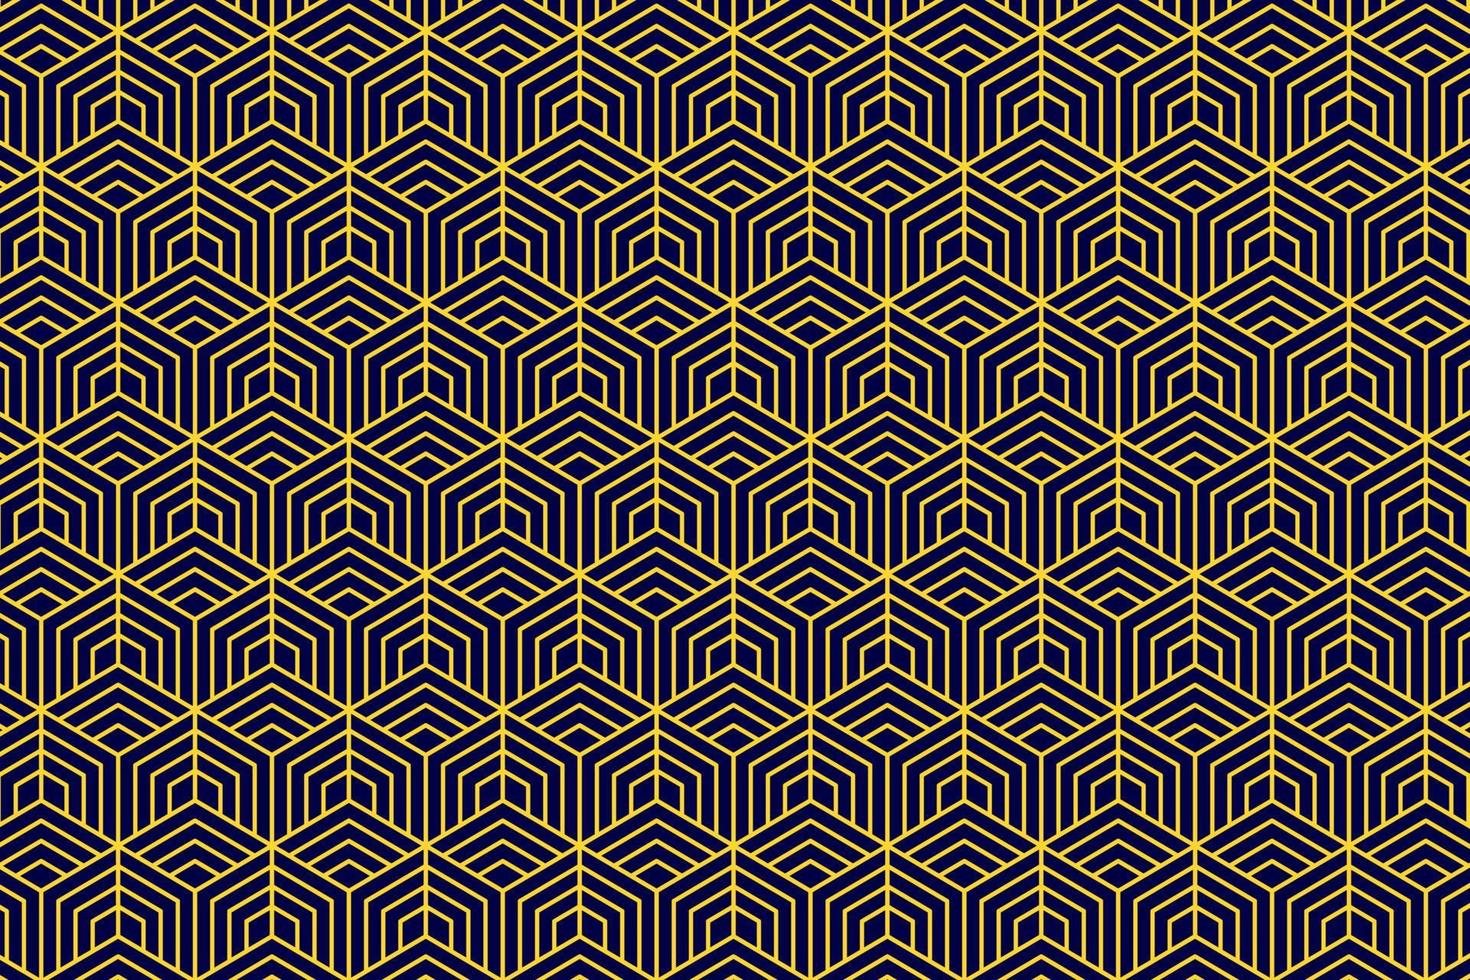 pattern design, ideal for background pattern texture vector